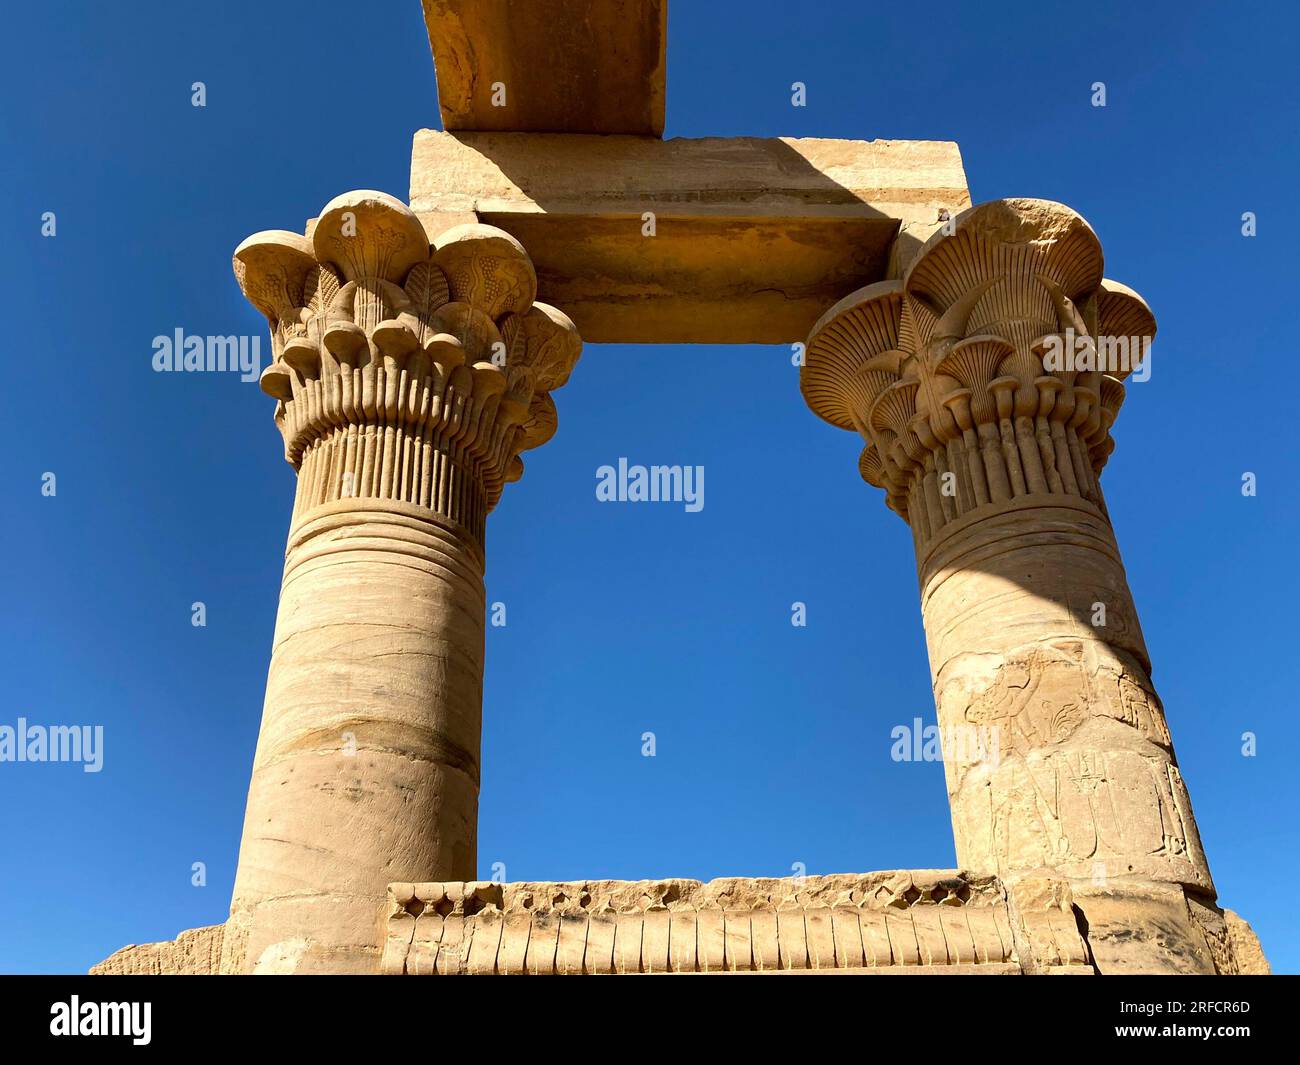 Temple of Kalabsha, Temple of Mandulis. Ancient Egyptian temple, Nubian temple in Egypt. Stock Photo